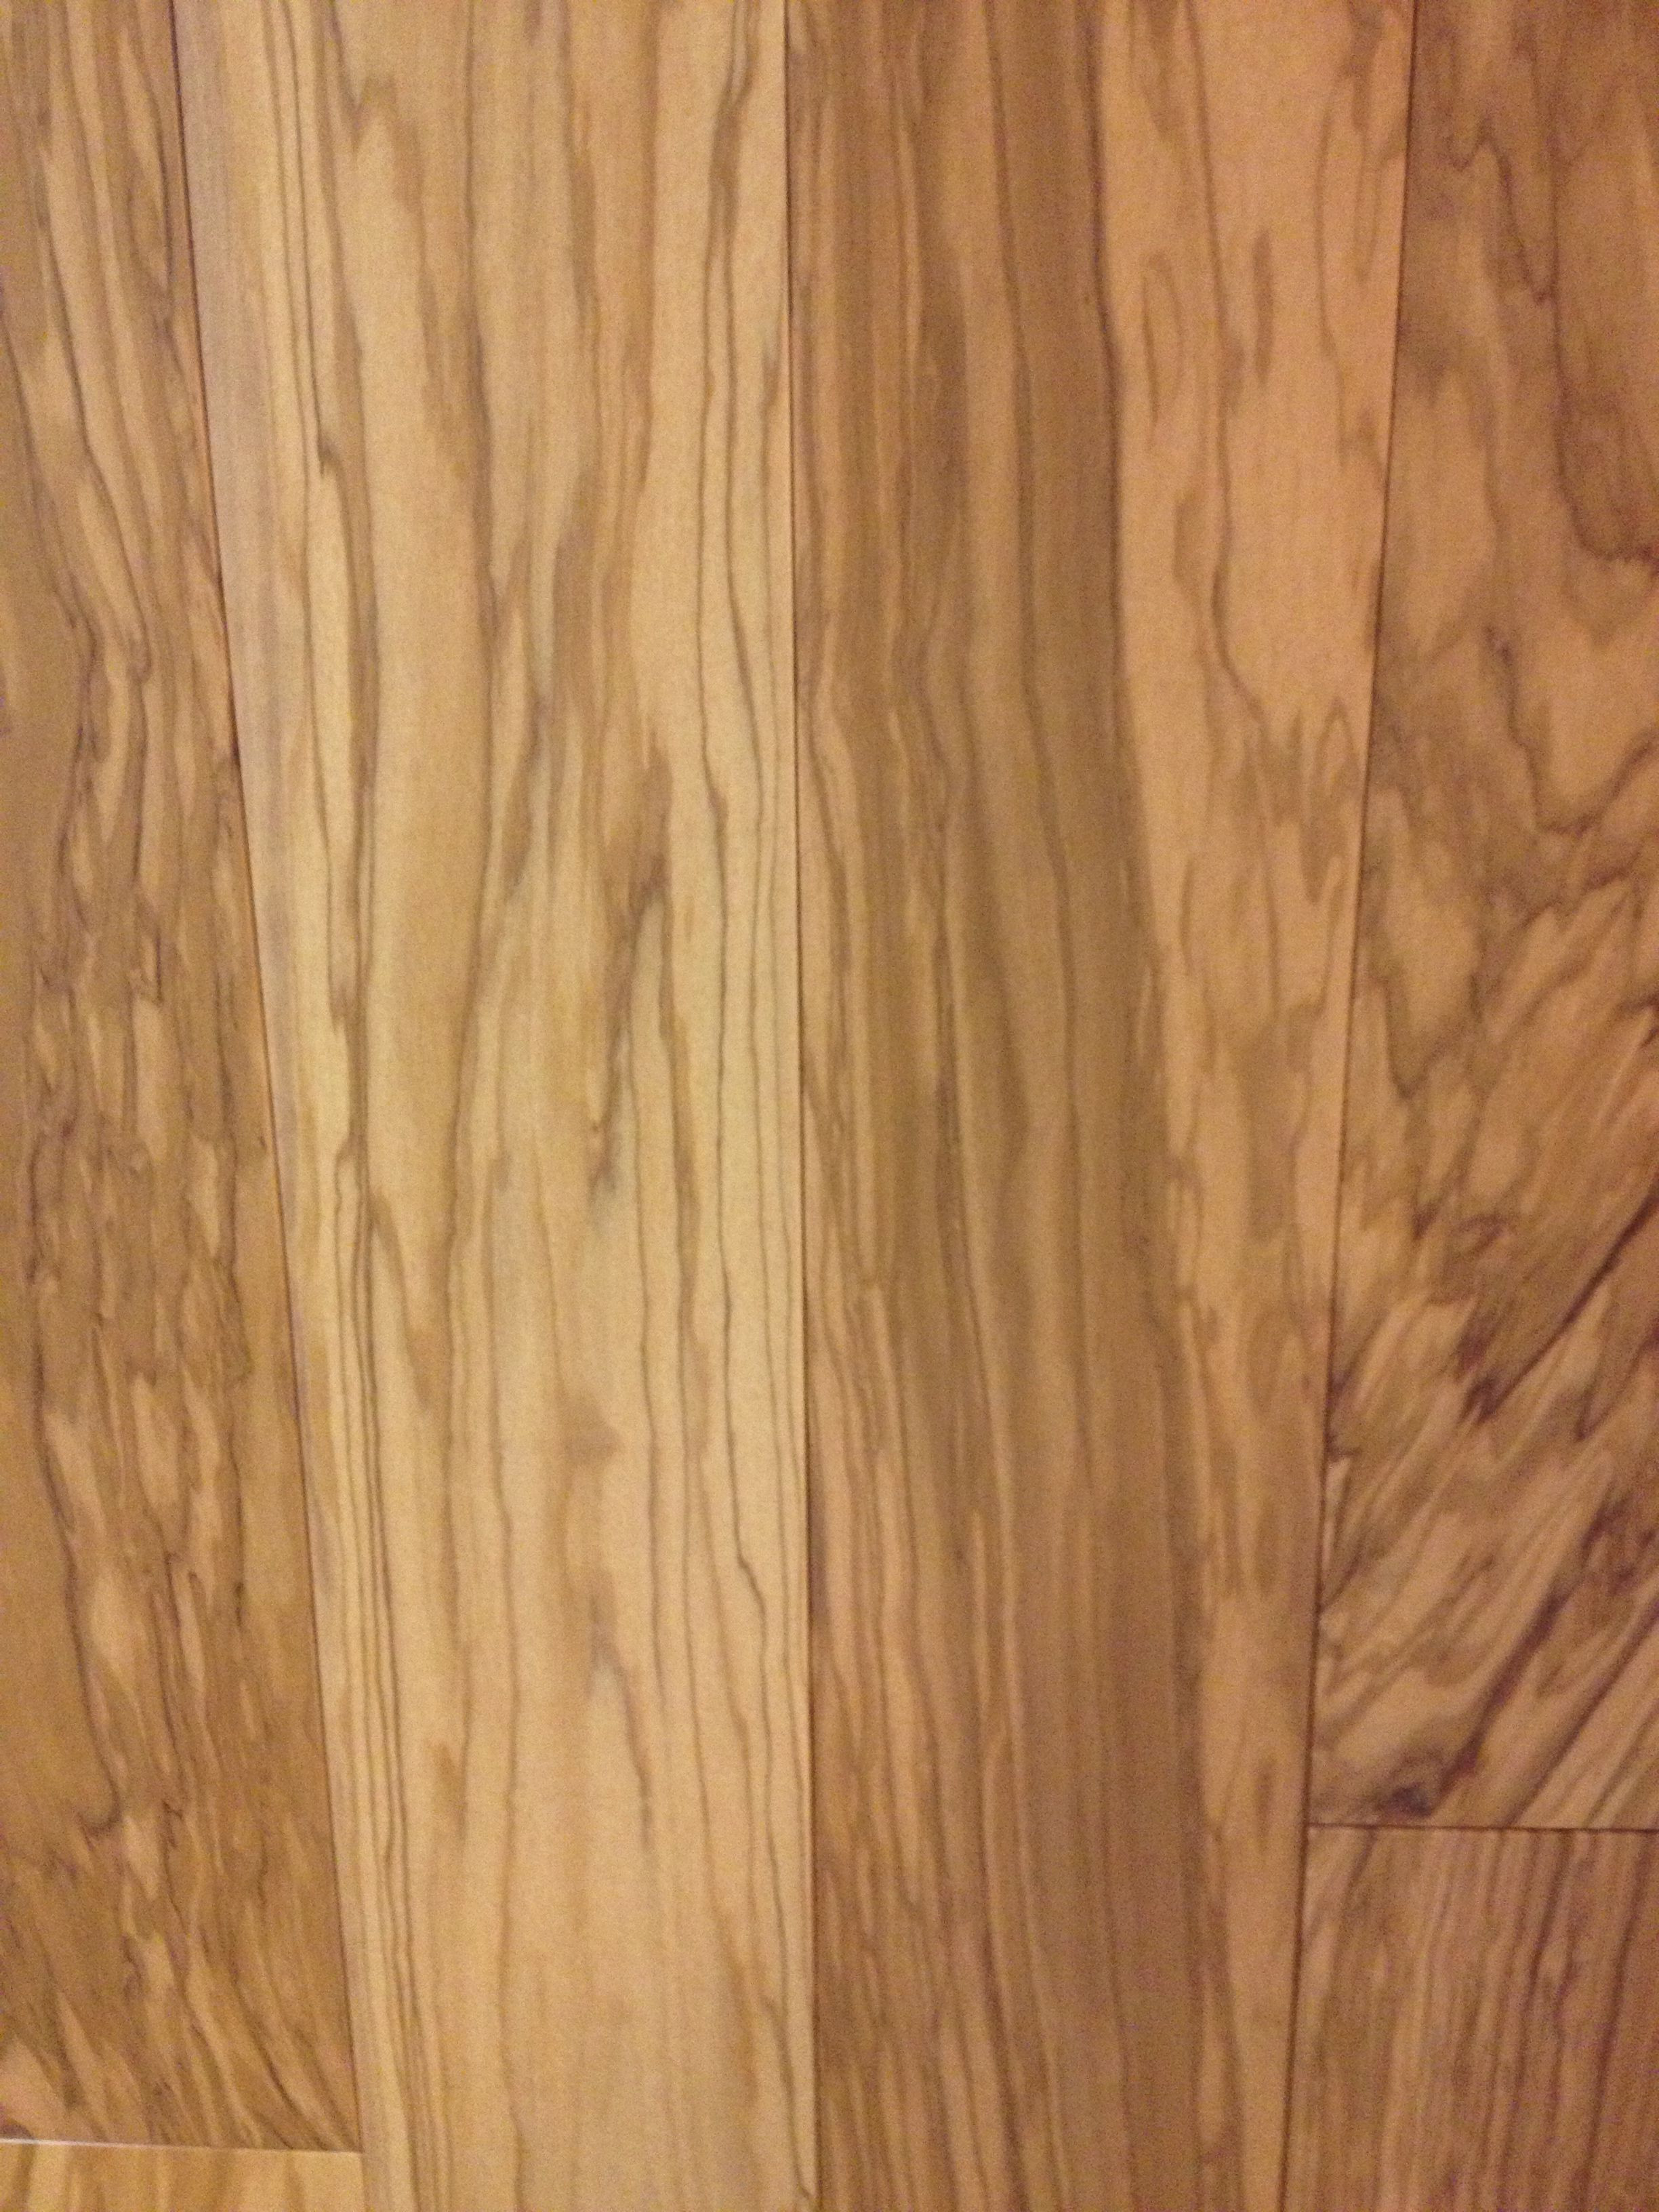 17 Spectacular Cost Of Refinishing Hardwood Floors toronto 2024 free download cost of refinishing hardwood floors toronto of tuscany olive wood floor there is nothing quite like olive wood for throughout tuscany olive wood floor there is nothing quite like olive wood 